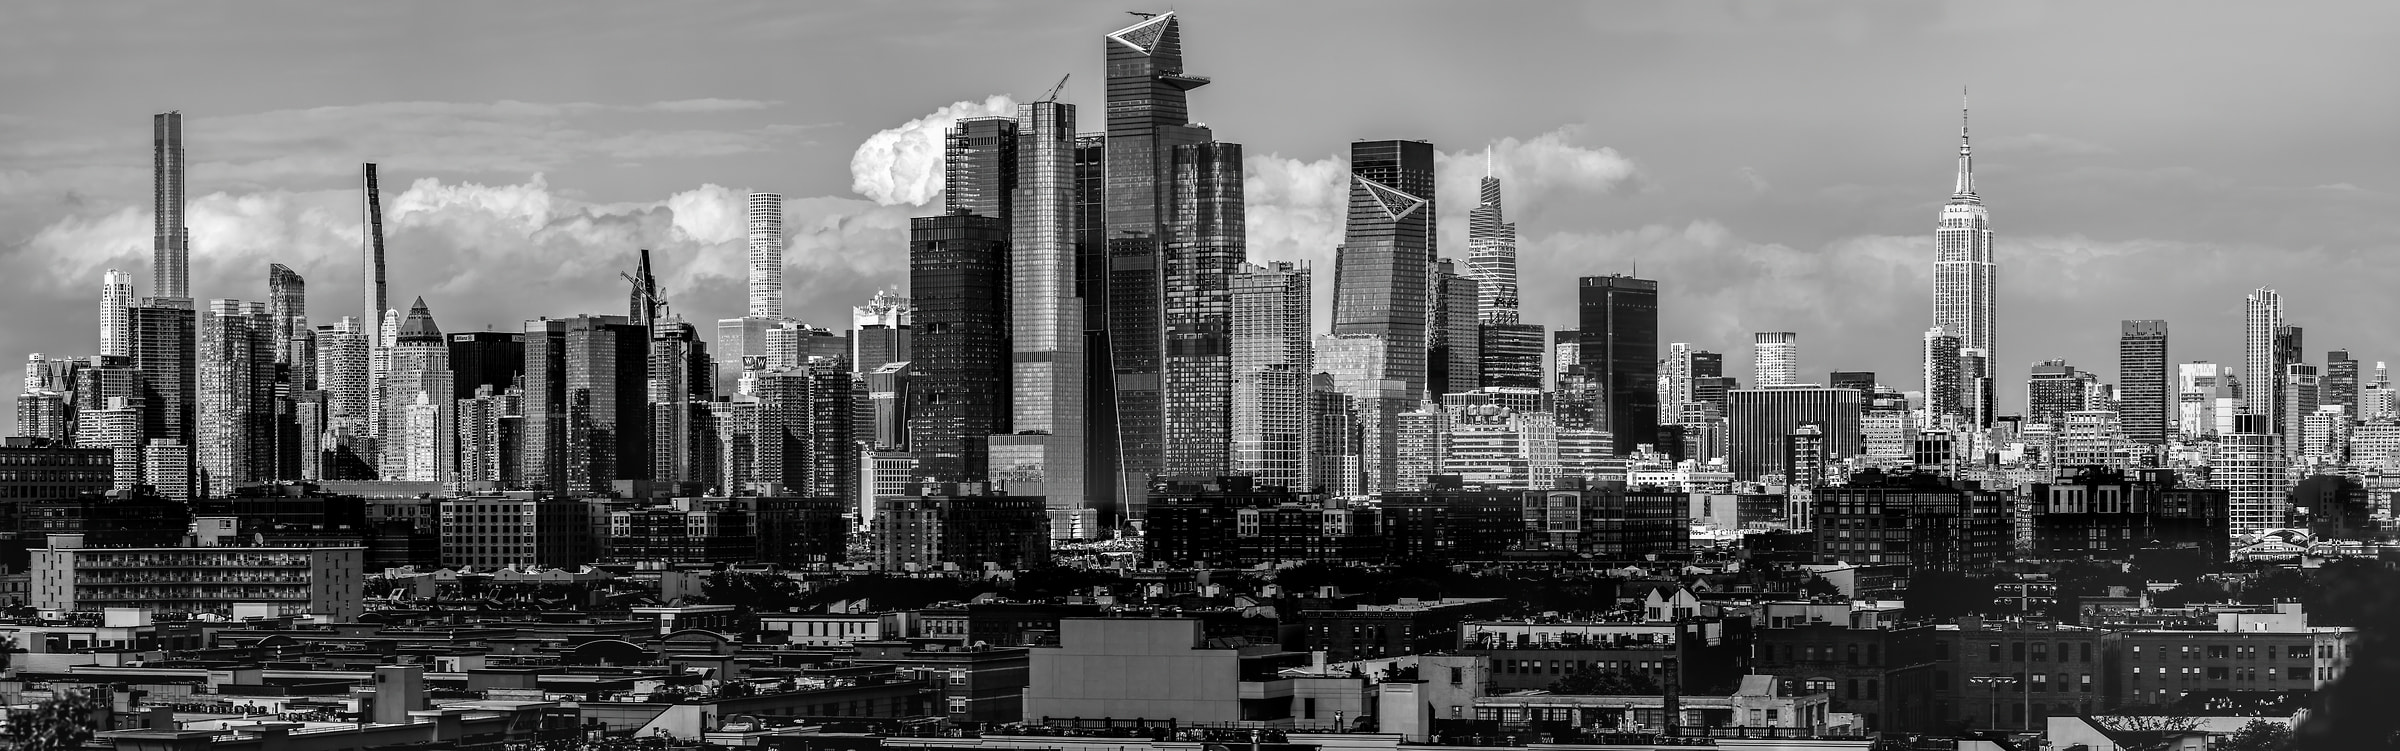 273 megapixels! A very high resolution, large-format black & white photo of Hudson Yards in New York City; skyline photograph created by Beyti Barbaros in Jersey City, New Jersey.